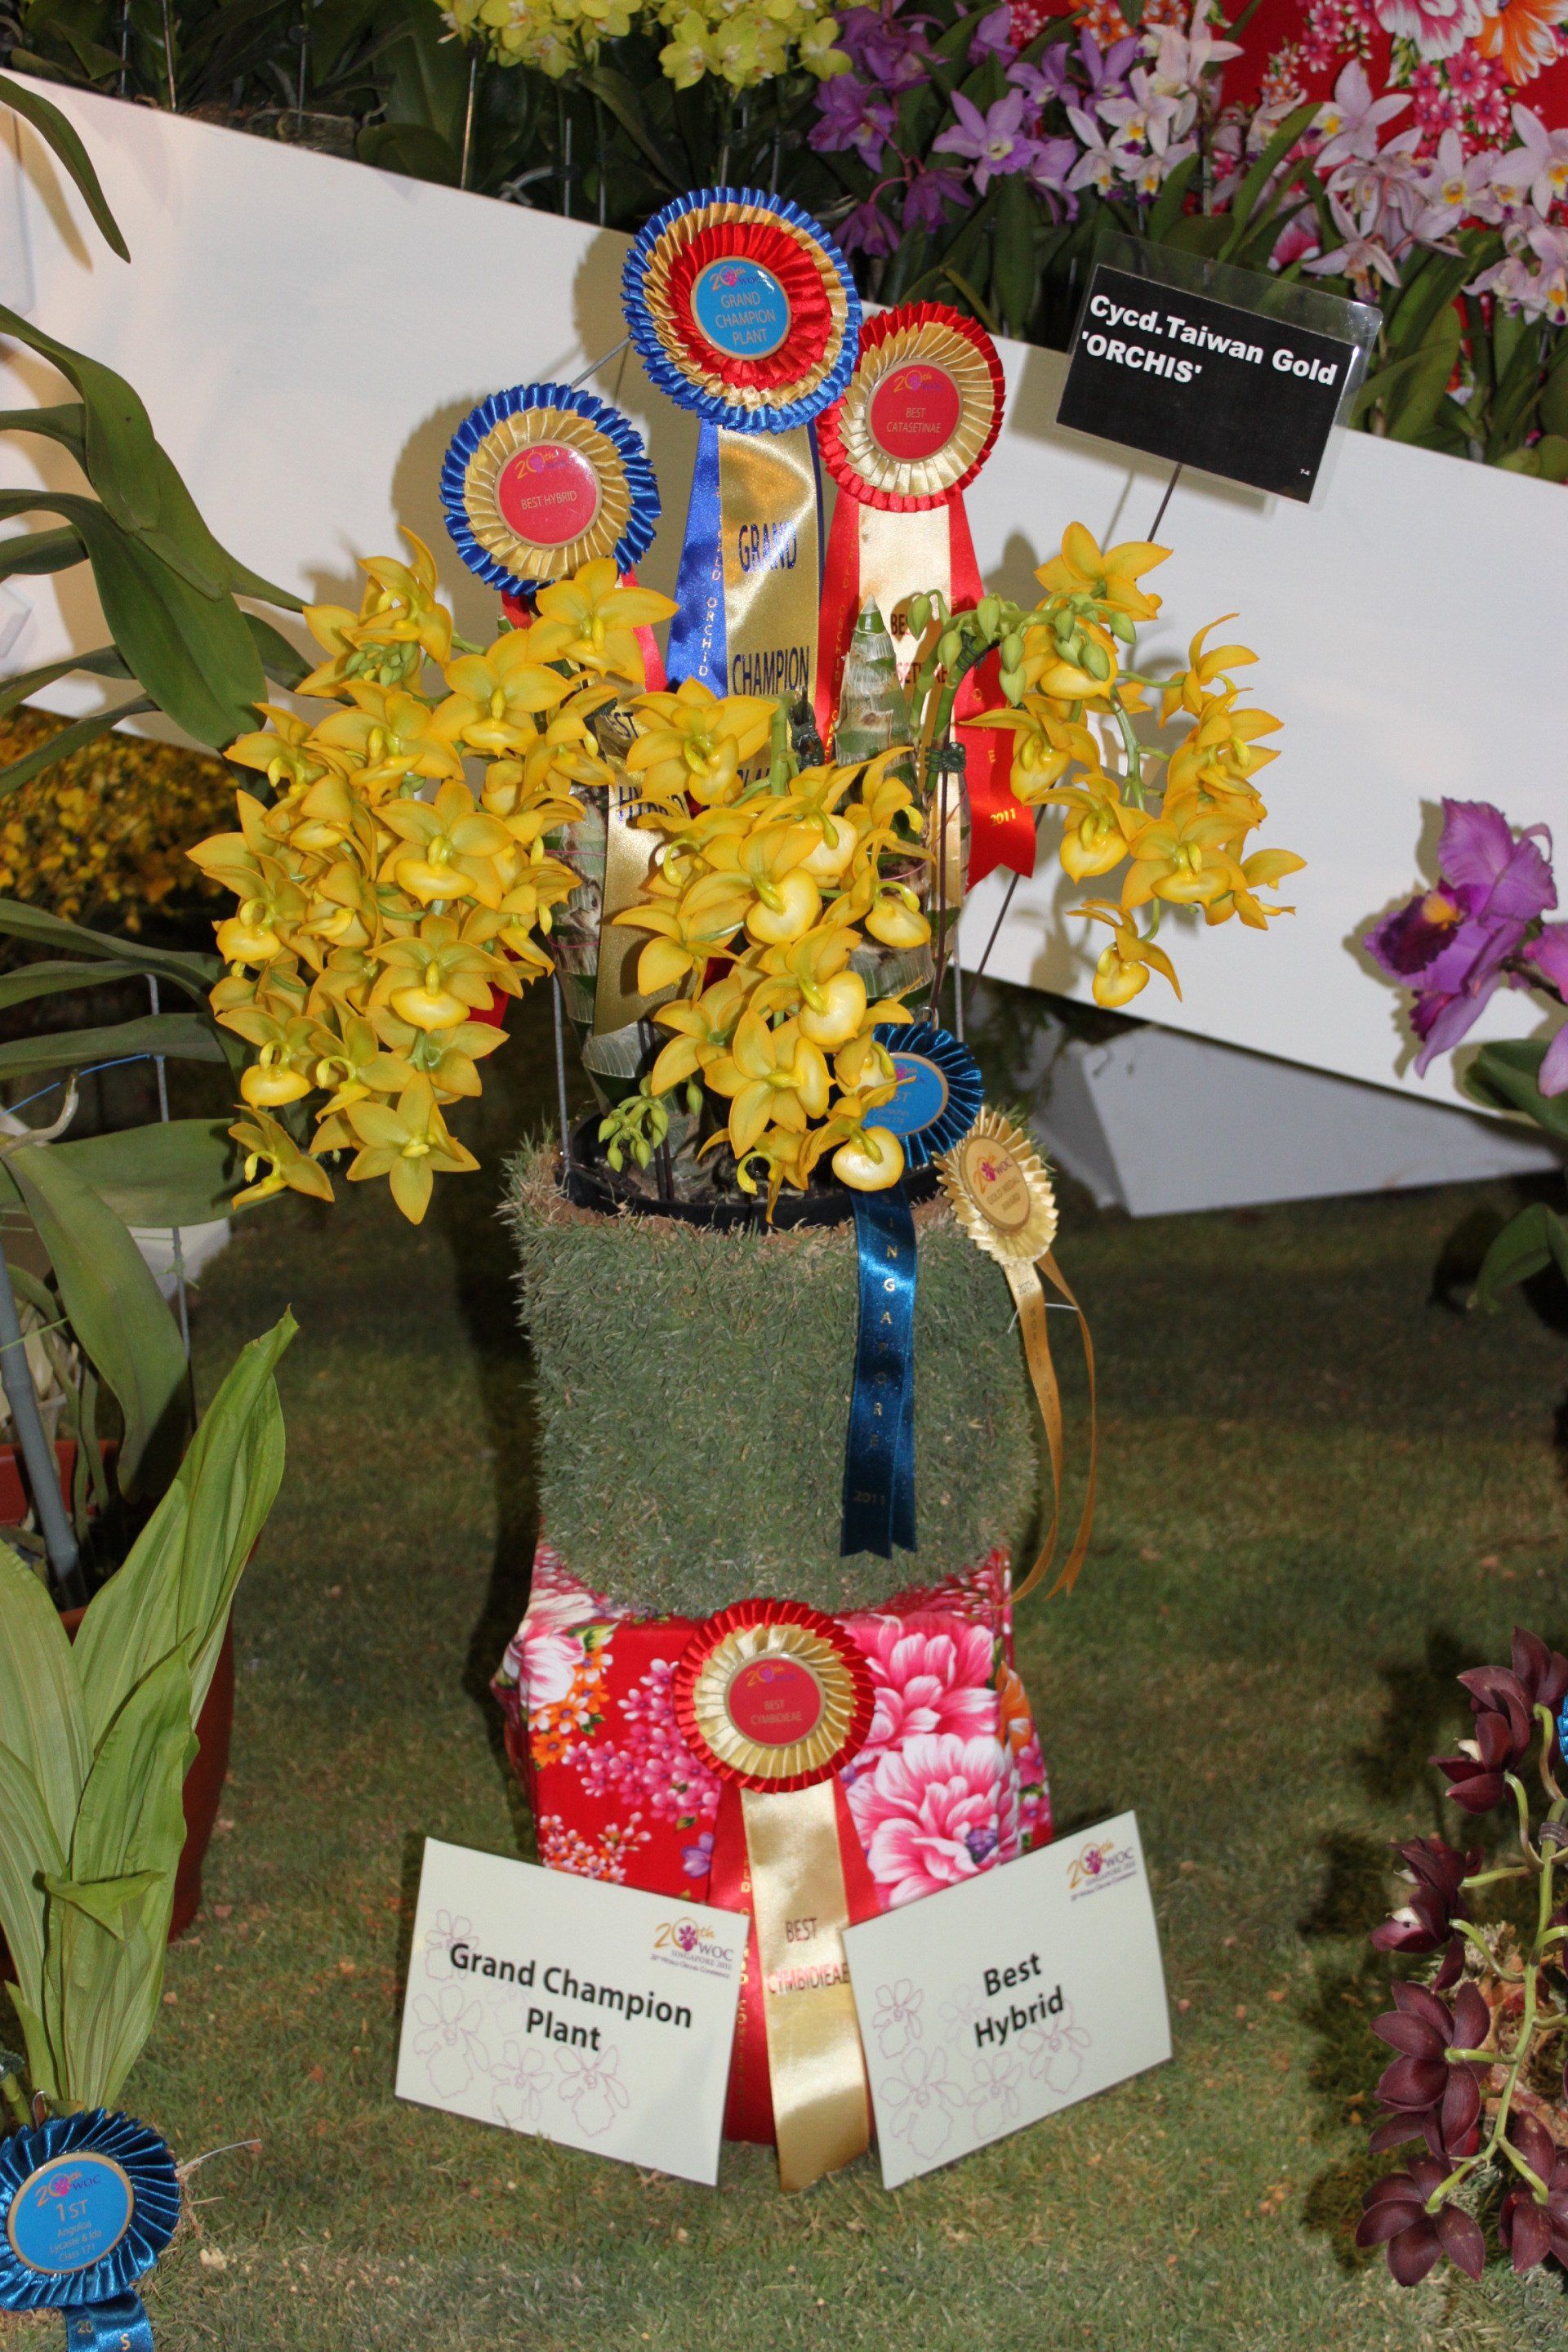 Cycnodes Taiwan Gold ‘Orchis’ Grand Champion owned by Orchis Floriculturing Inc., Taiwan